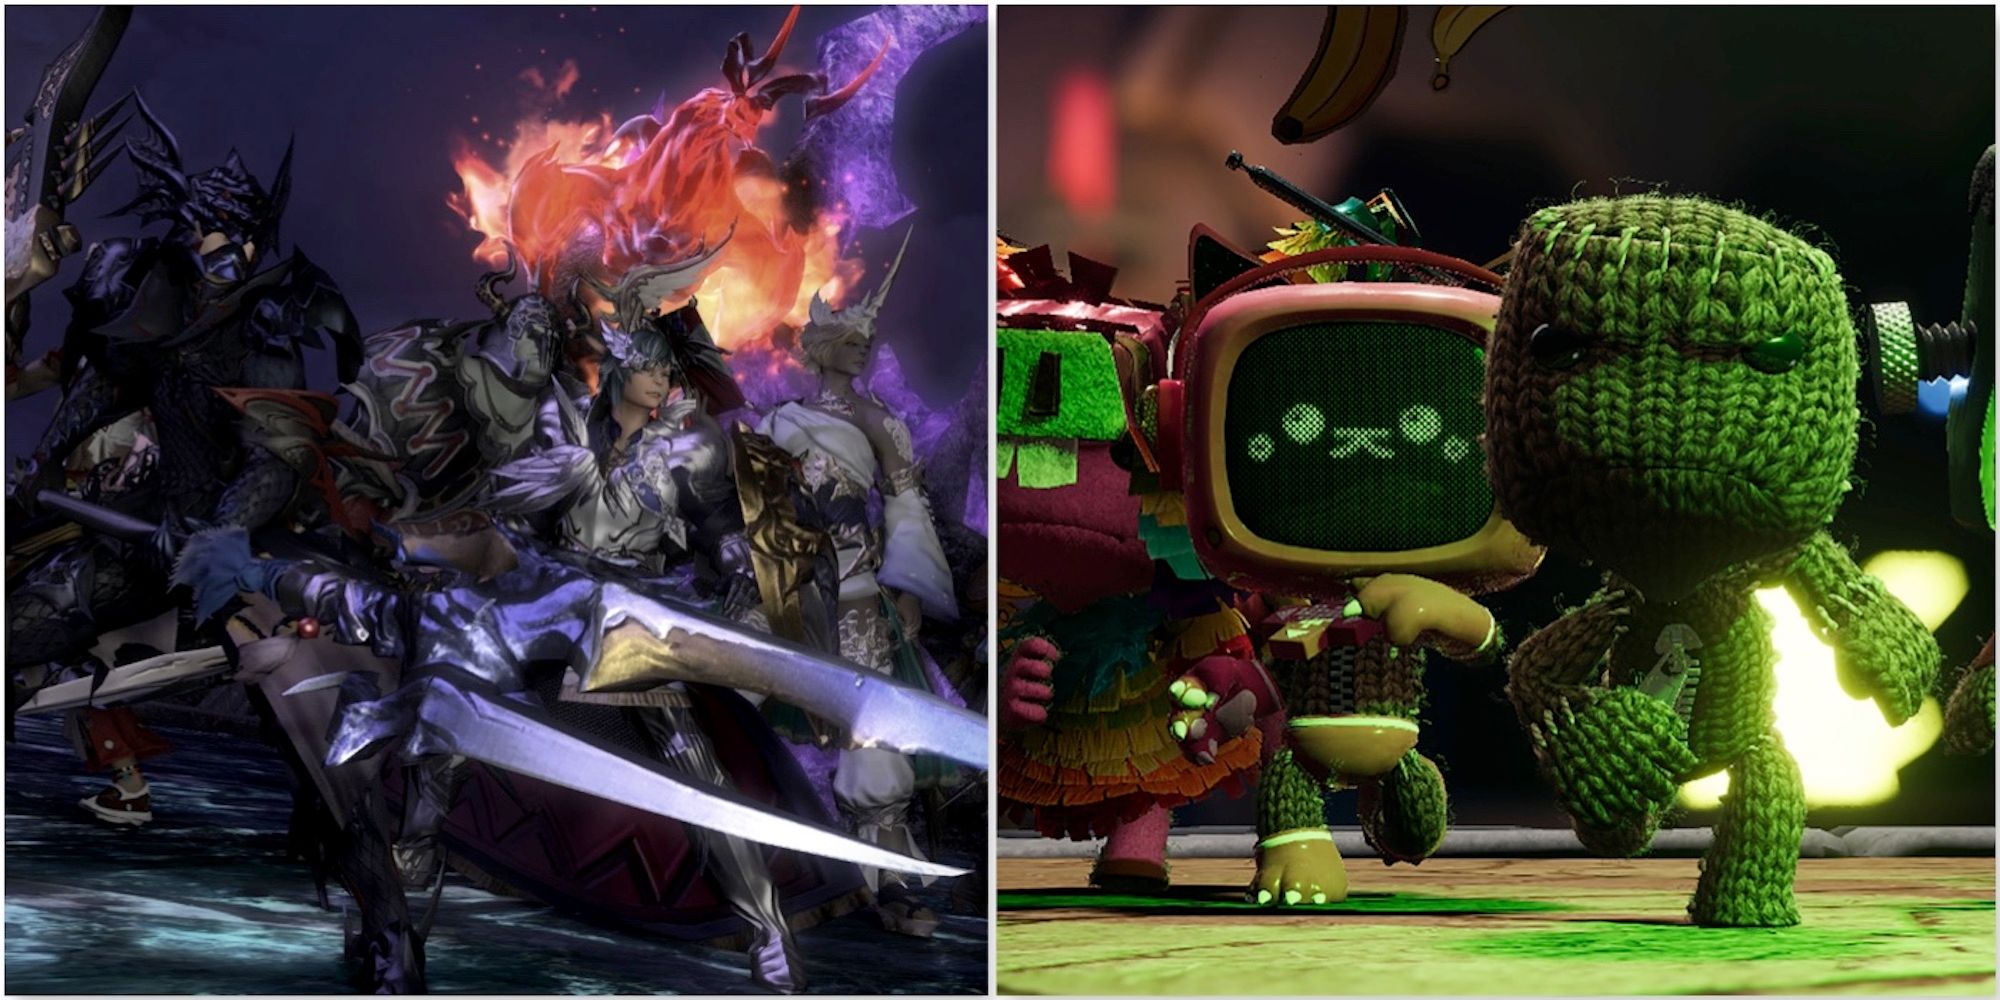 A party in Final Fantasy 14 and Sackboy A Big Adventure